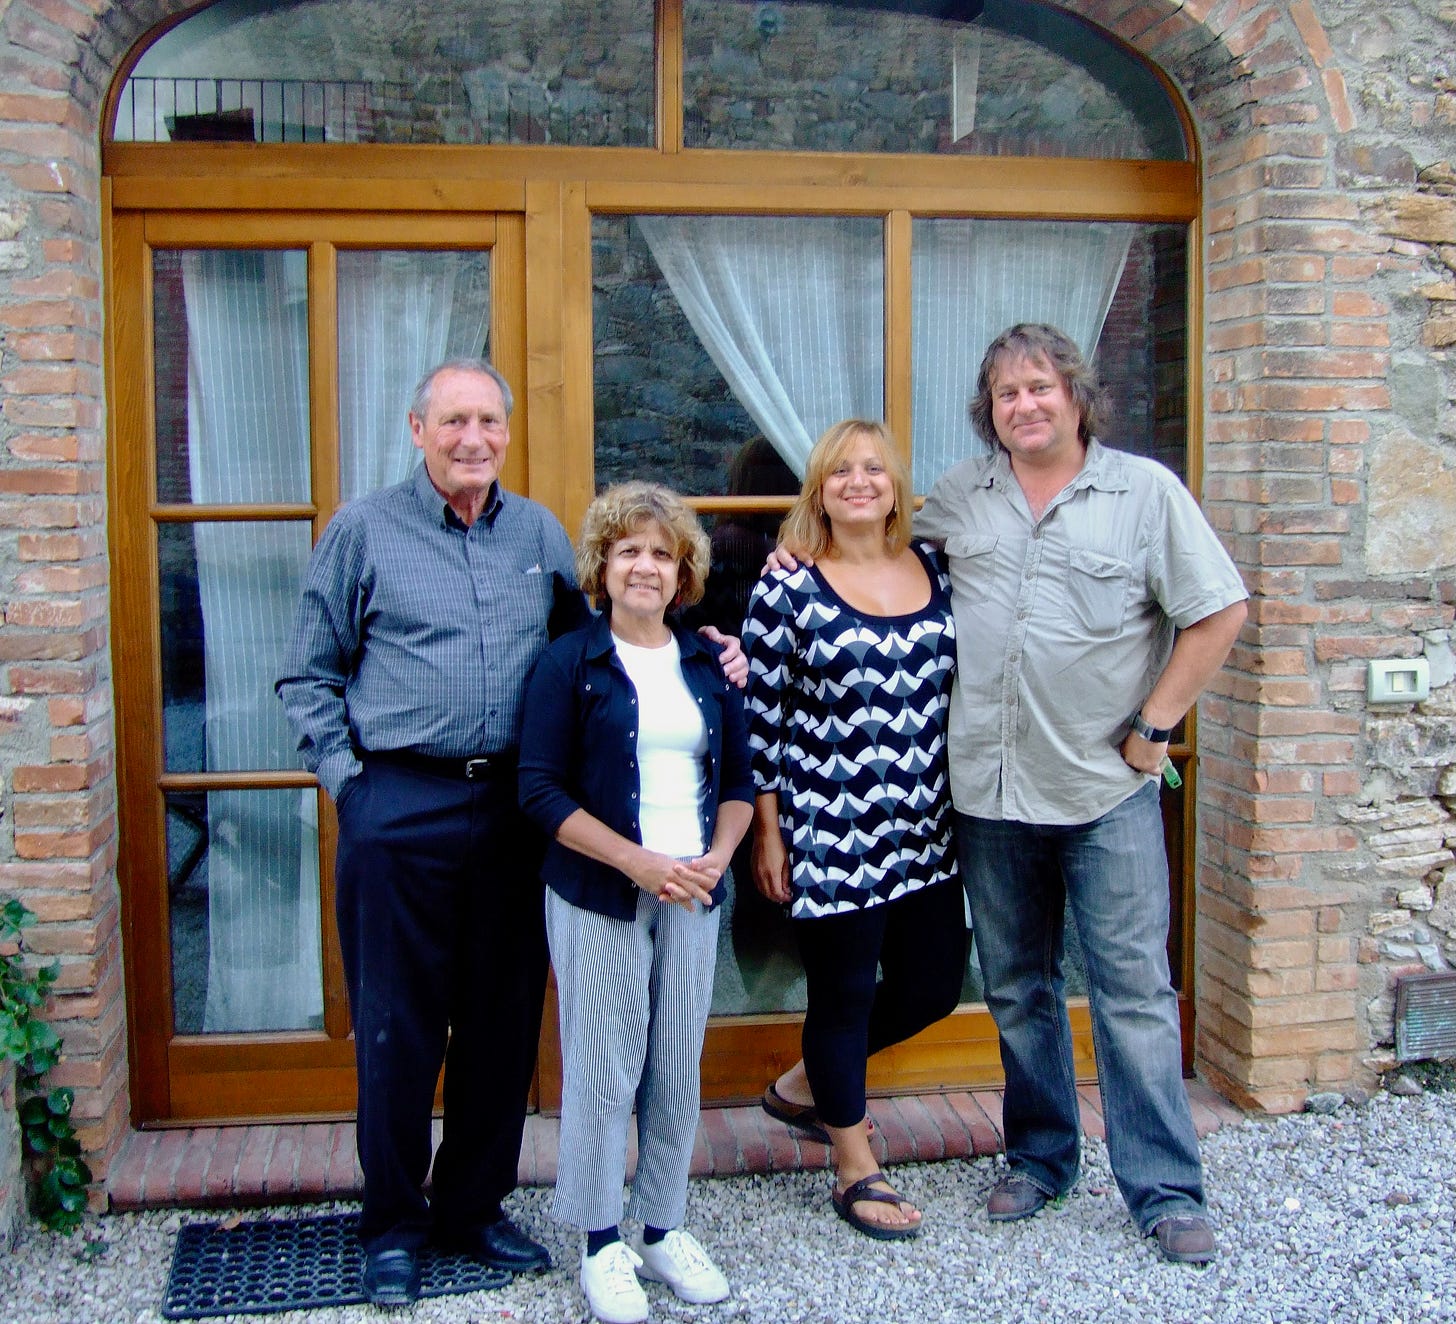 Parents-in-law Trevor and Christine with Sarah and Jowi at Villa Buoninsegna in Tuscany